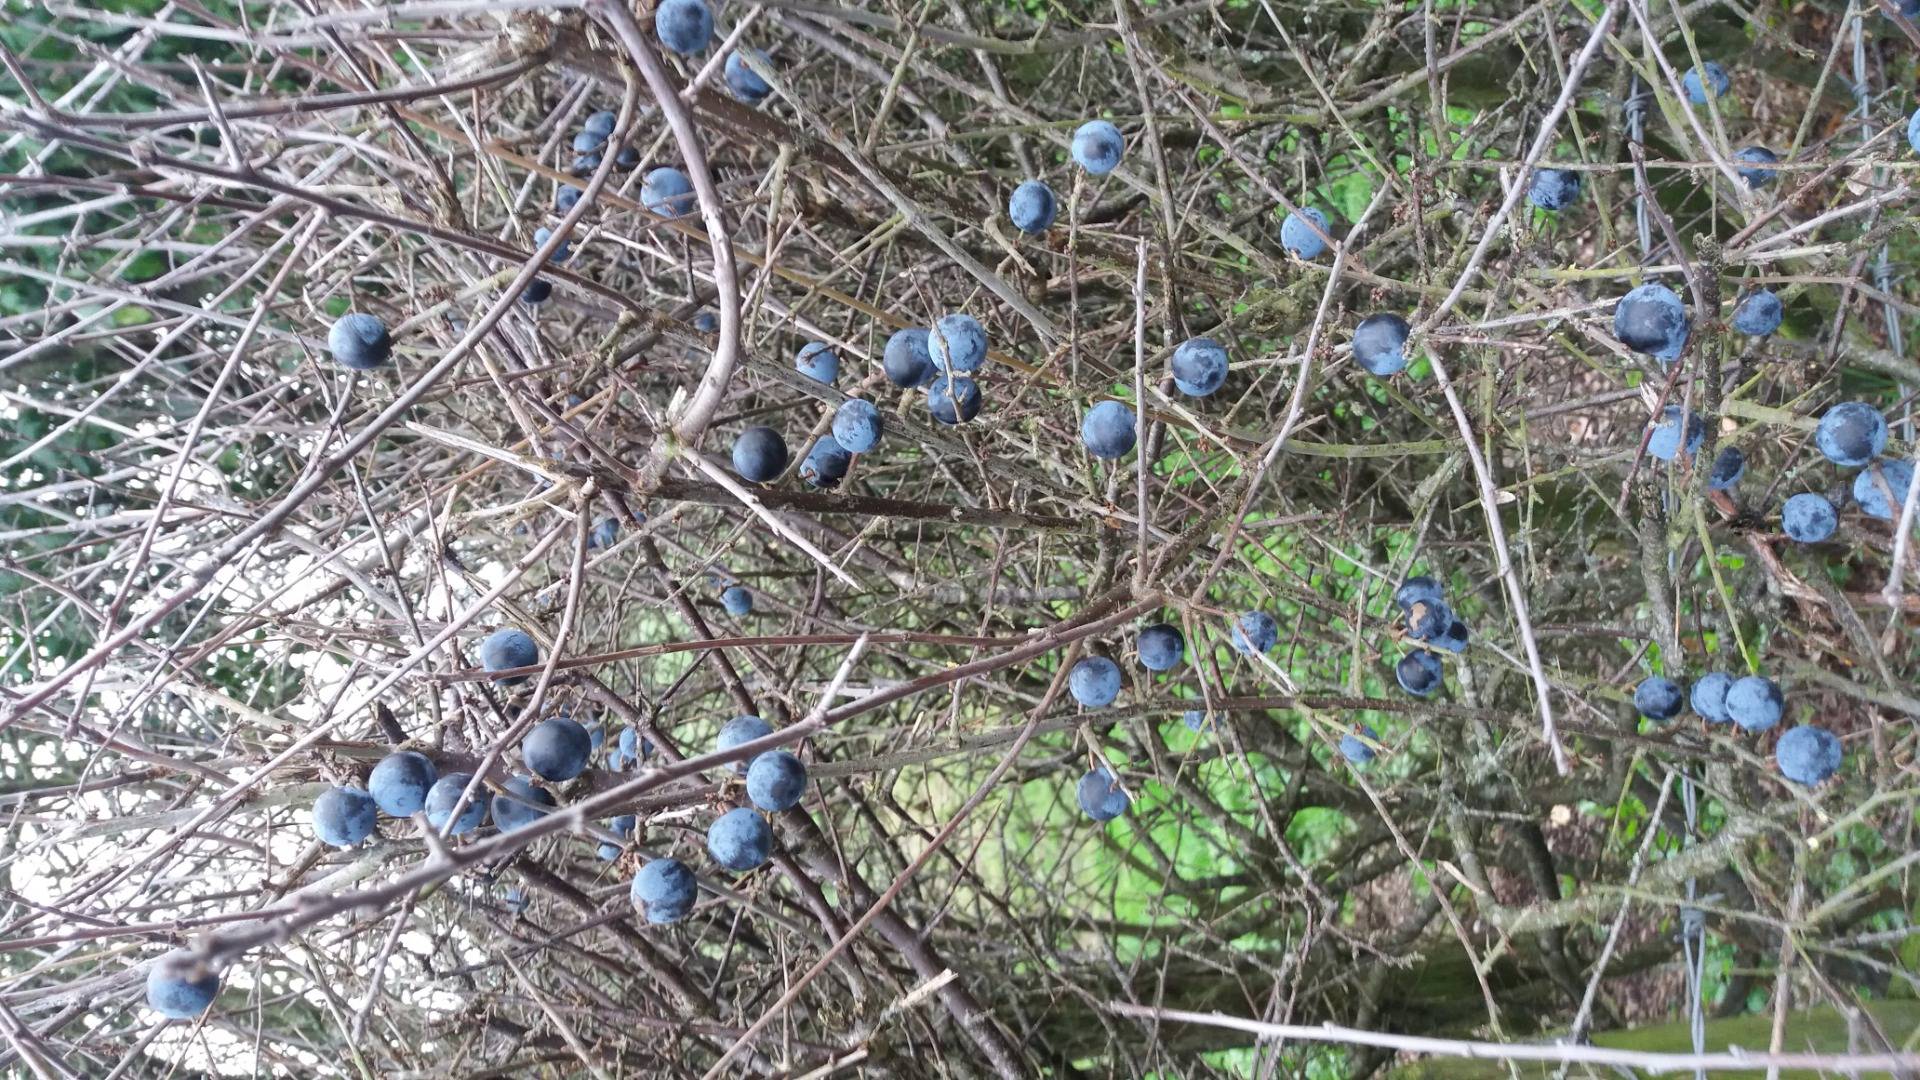 Sloes/Blackthorn berries. Quite common in the UK and often used to make homemade sloe gin